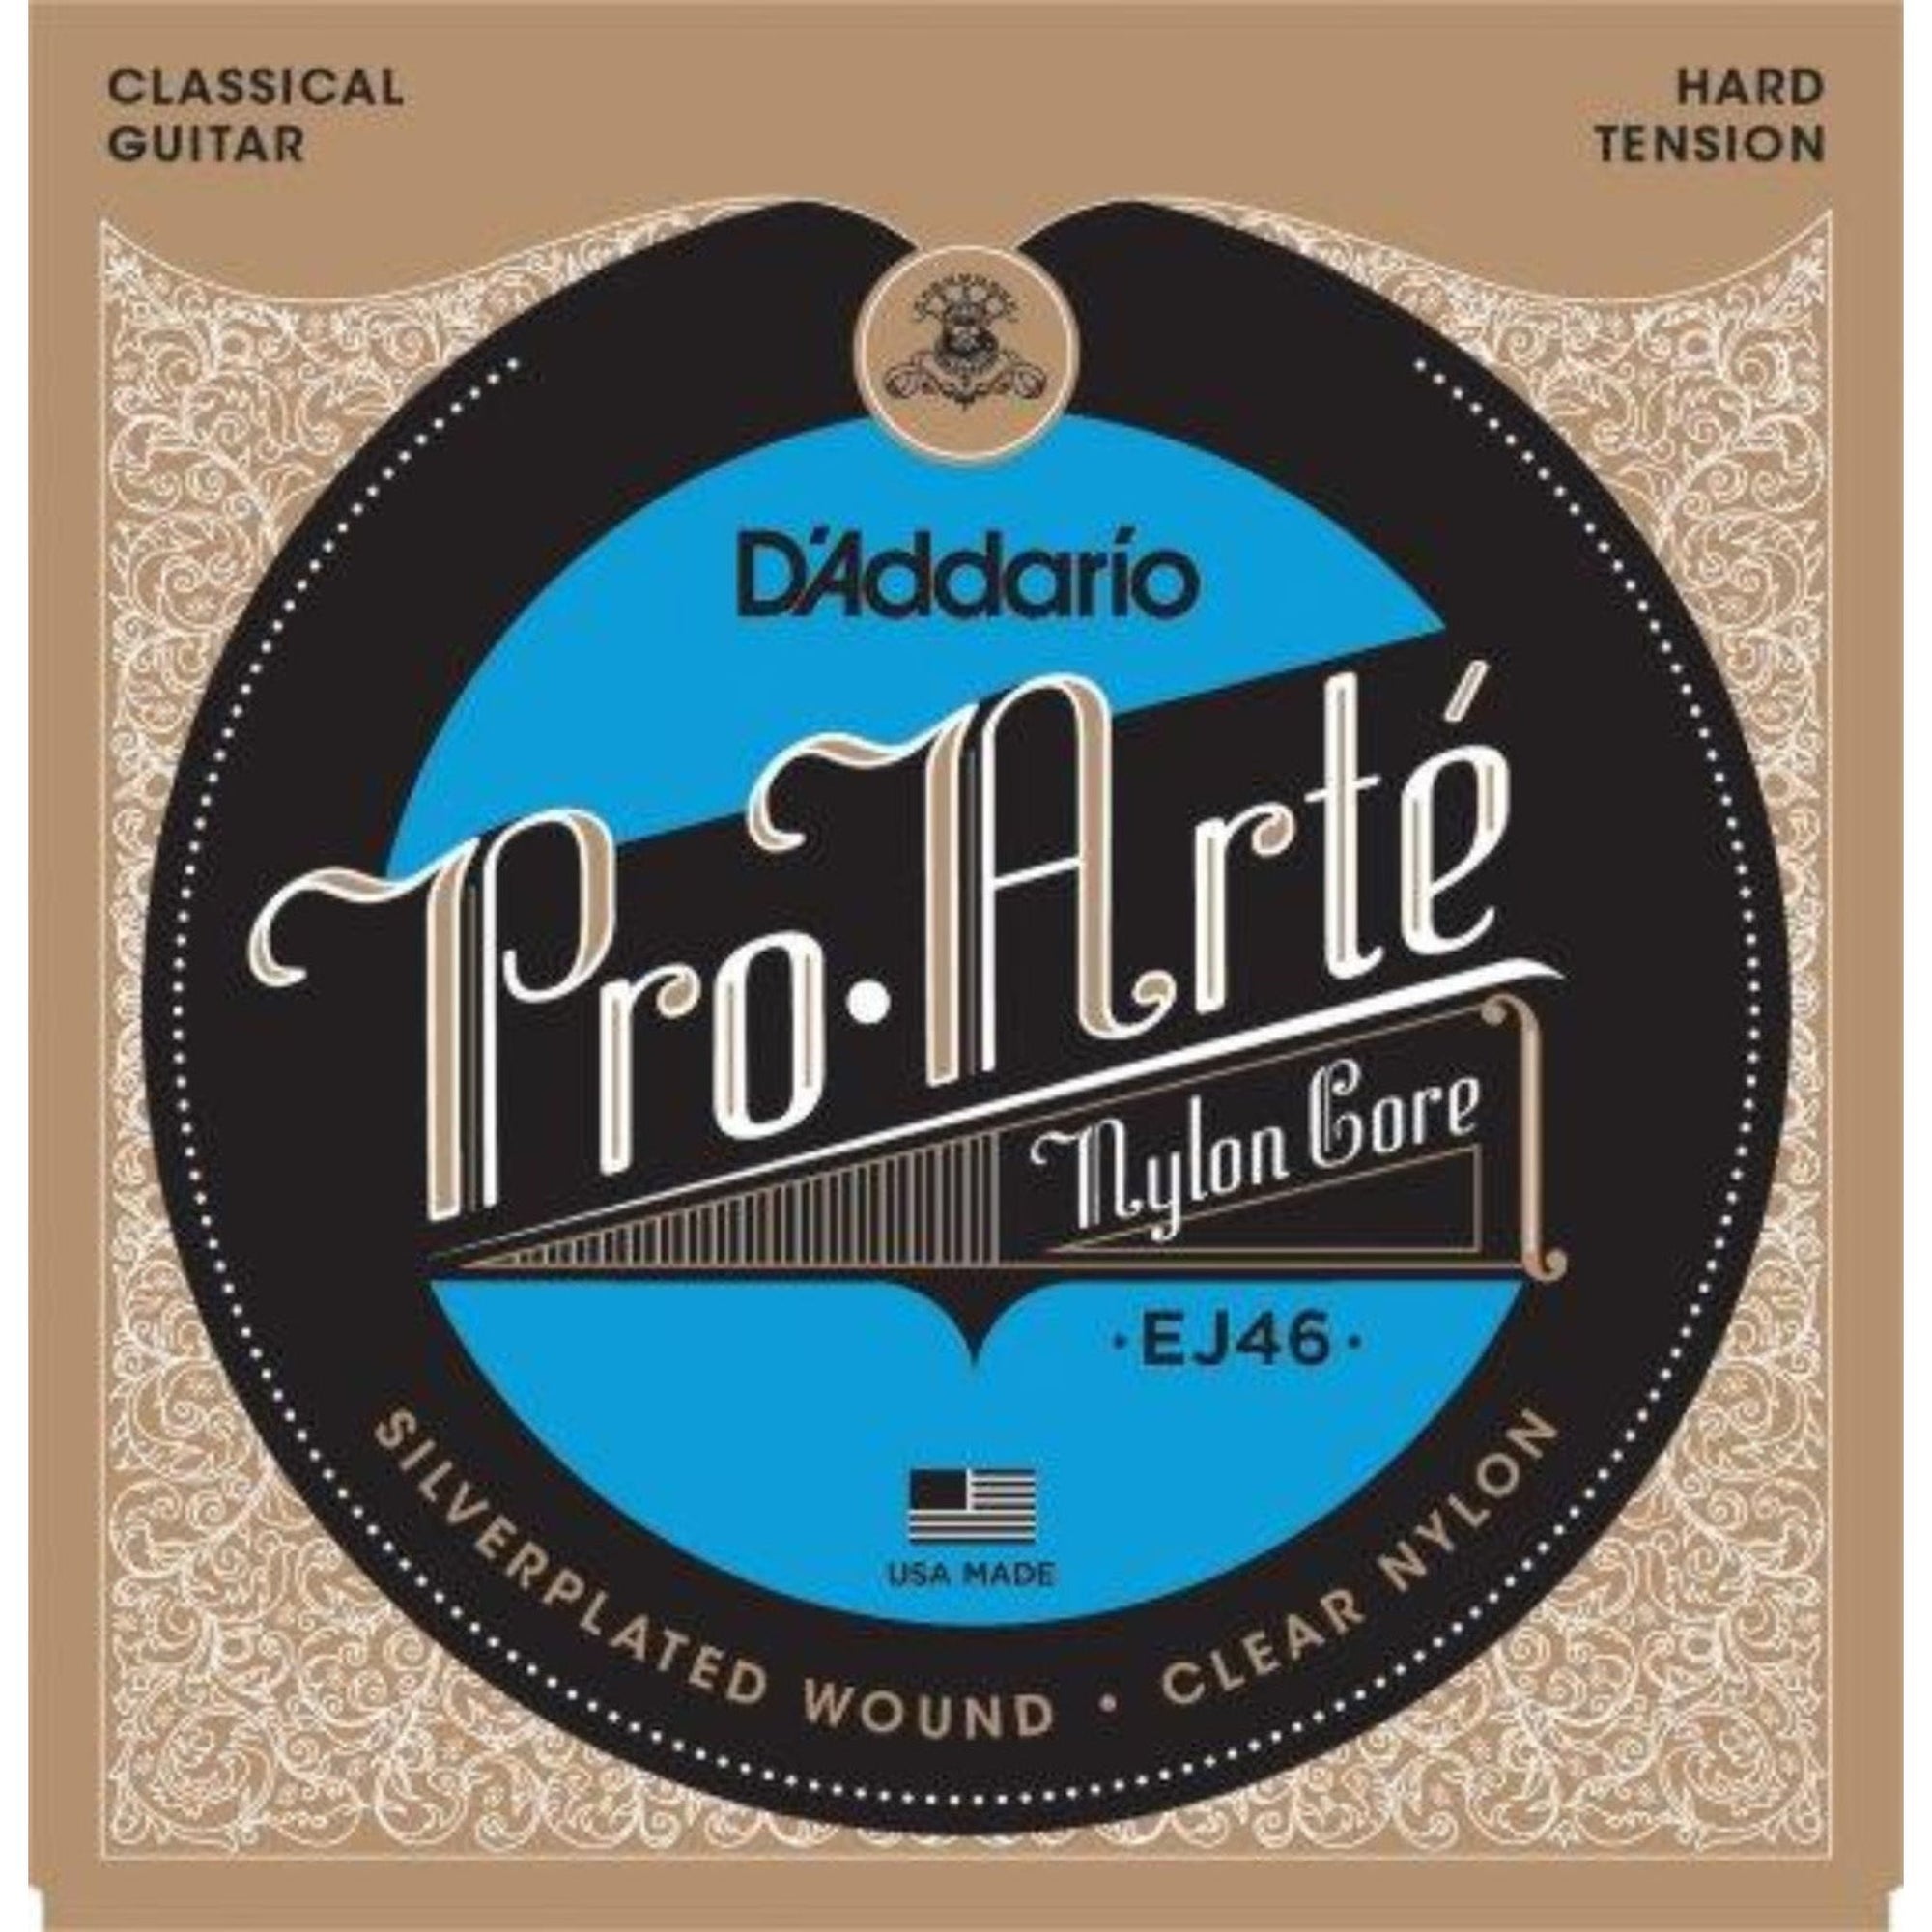 D'Addario EJ46 Classical Guitar String, hard tension, is a popular choice for its rich tone, increased resistance and strong projection. 